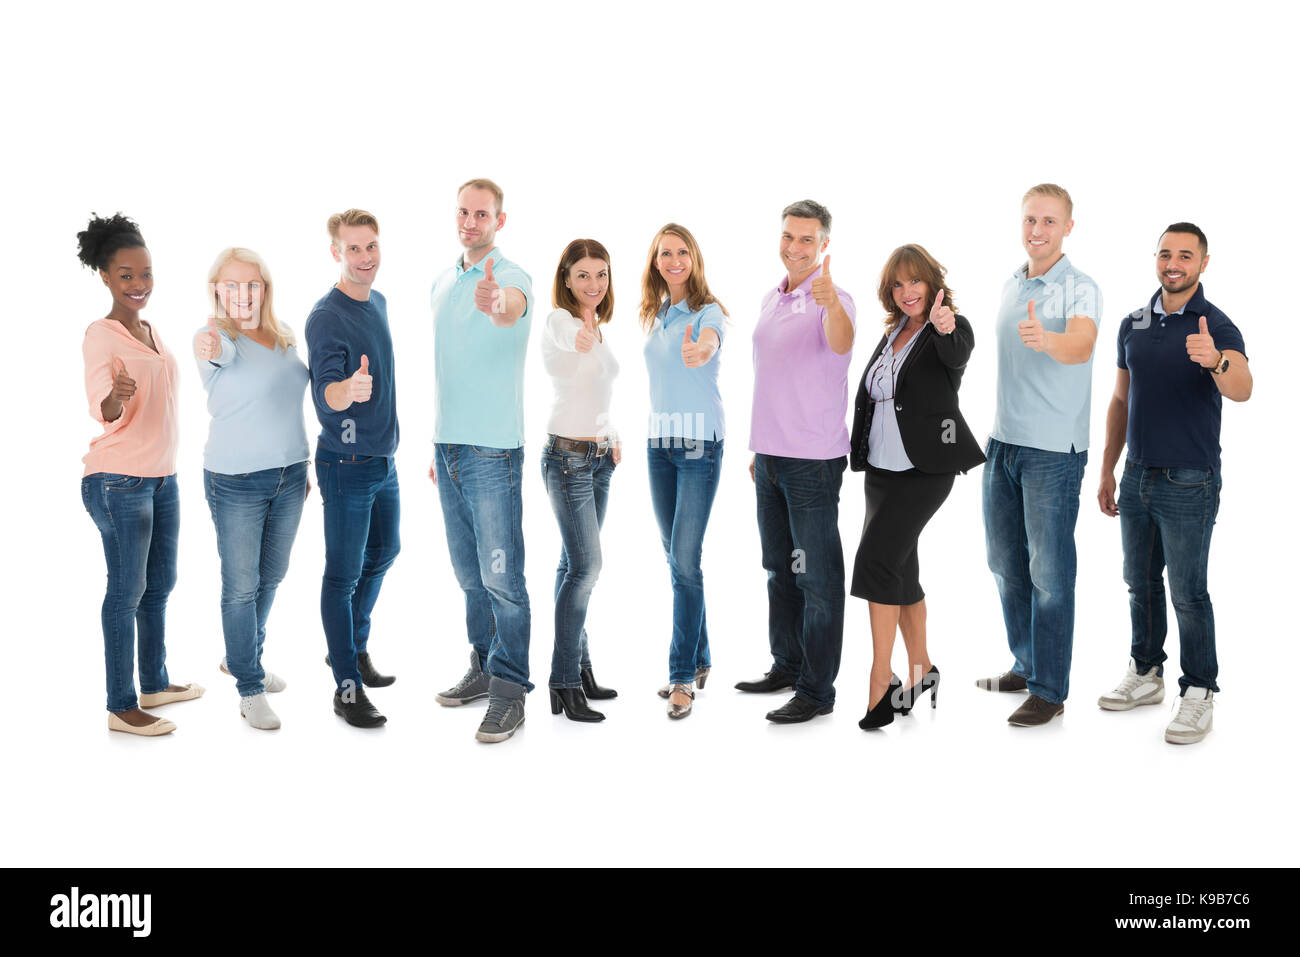 Full length portrait of creative business people standing together against white background Stock Photo